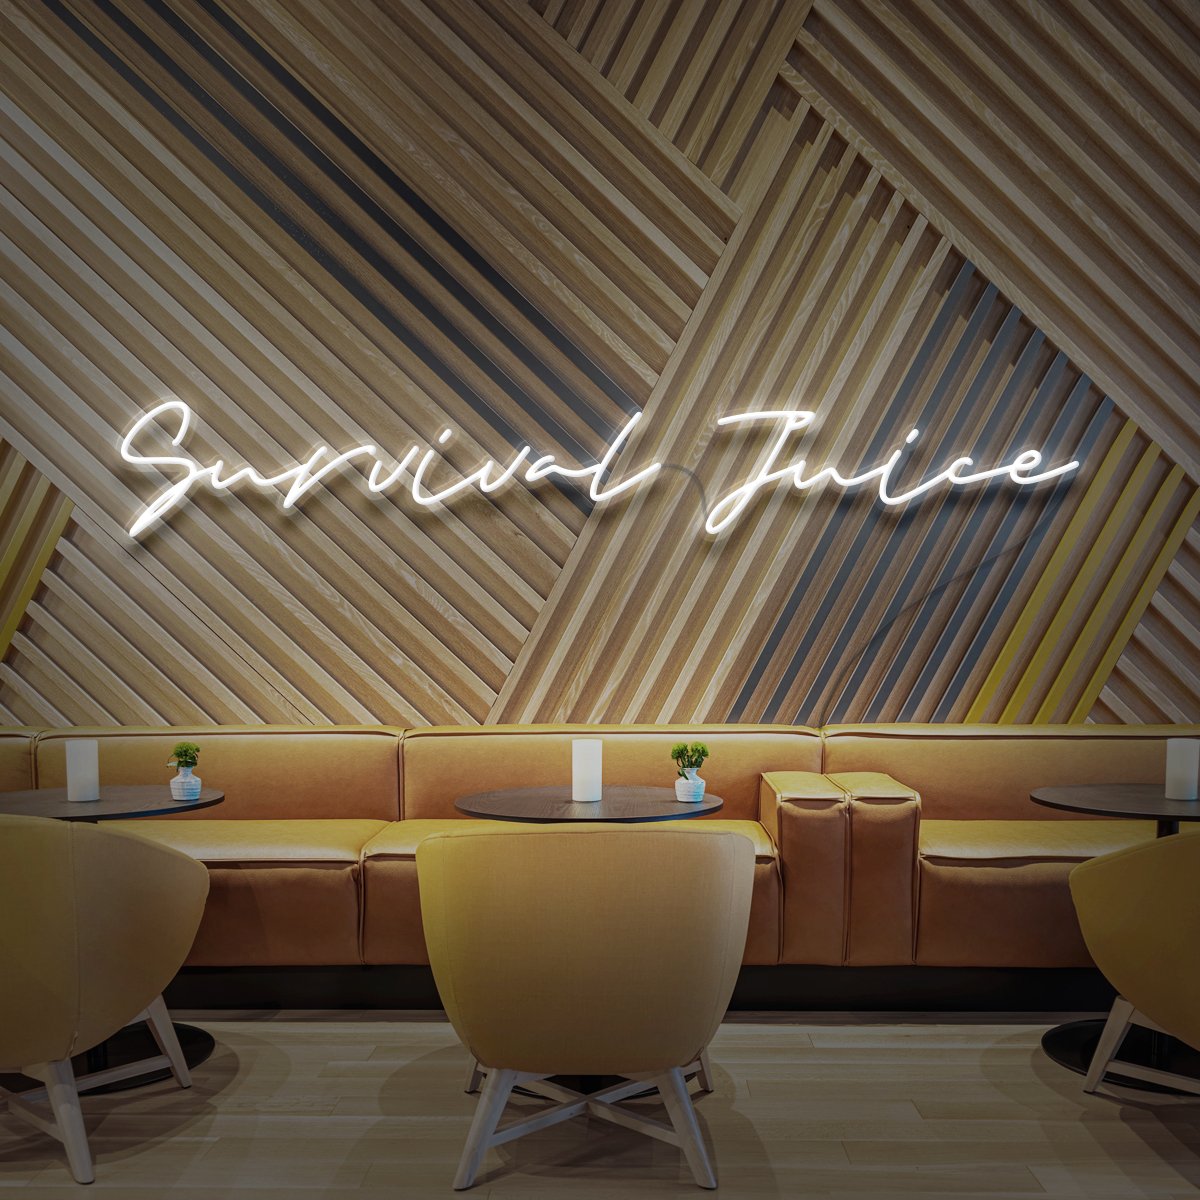 "Survival Juice" Neon Sign for Cafés 90cm (3ft) / White / LED Neon by Neon Icons